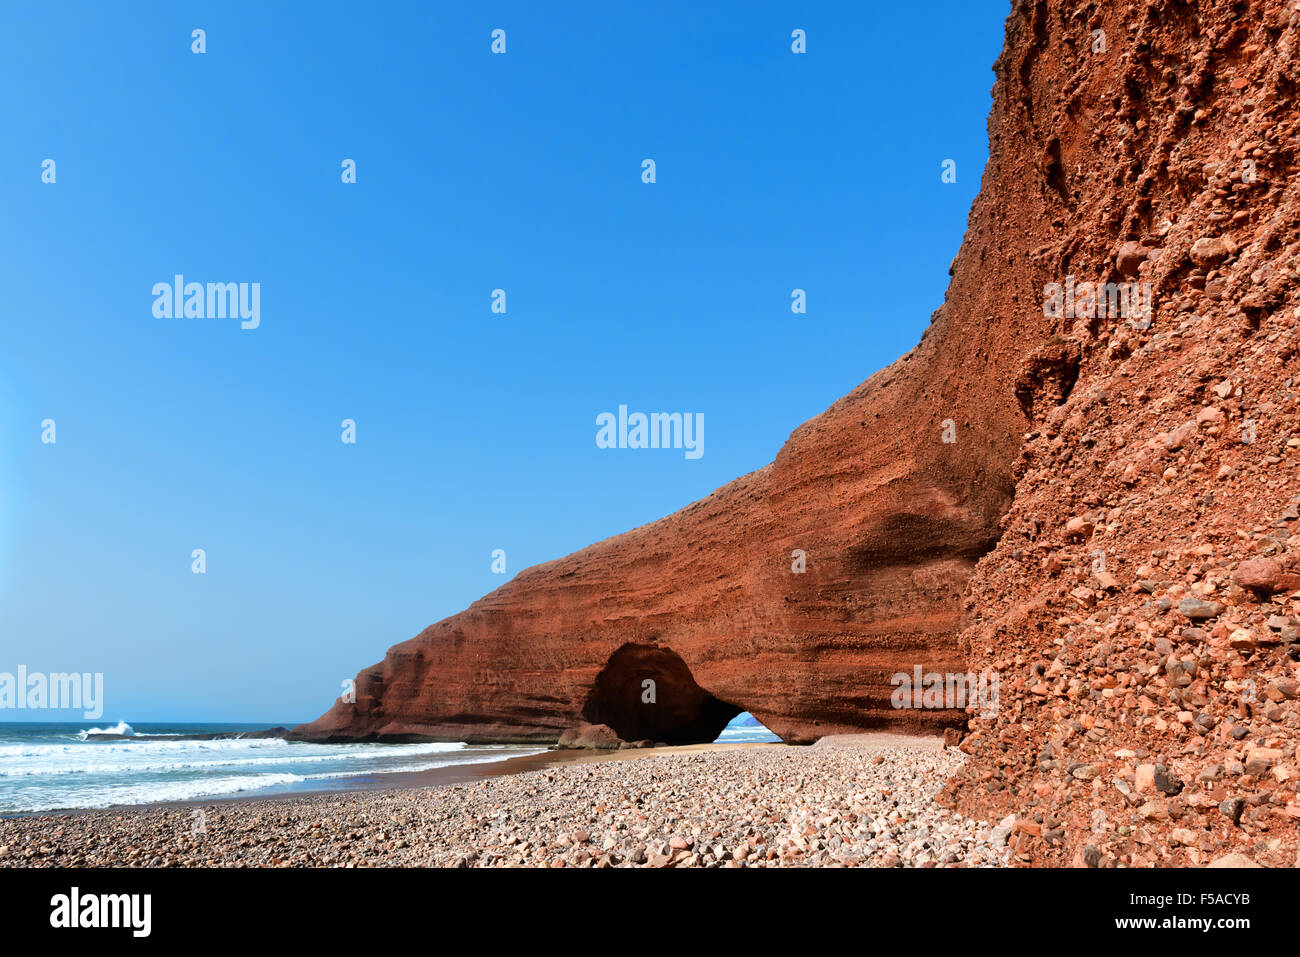 Natural sea-worn rock archways against clear blue sky at Legzira beach, Morocco. Stock Photo